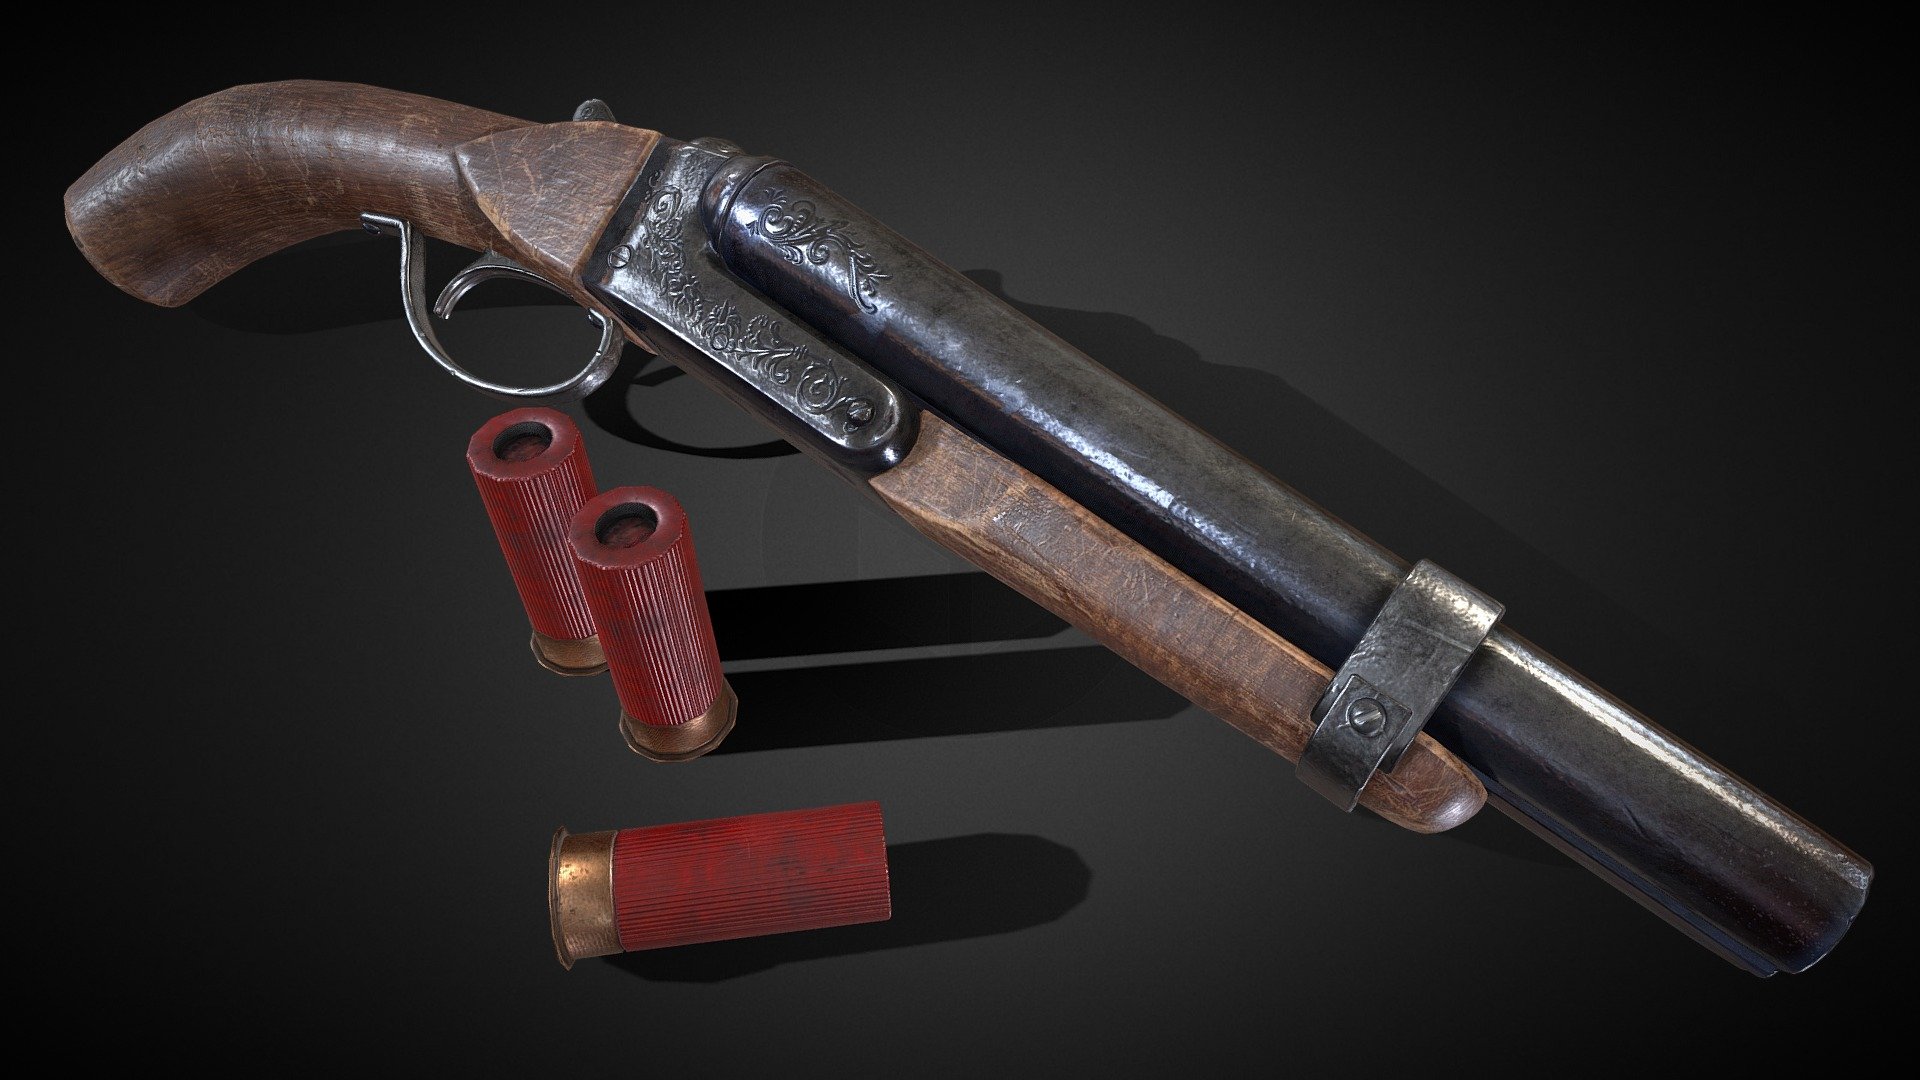 A good old fashion double barrel sawn-off Shotgun.

Worn yet still dignified, its barrel darken by flame. A firearm that's been through hell and back.

I also put in few shells for anyone who wants to do animation with.

The package comes with Maya original file and tga texture maps in 4K 3d model